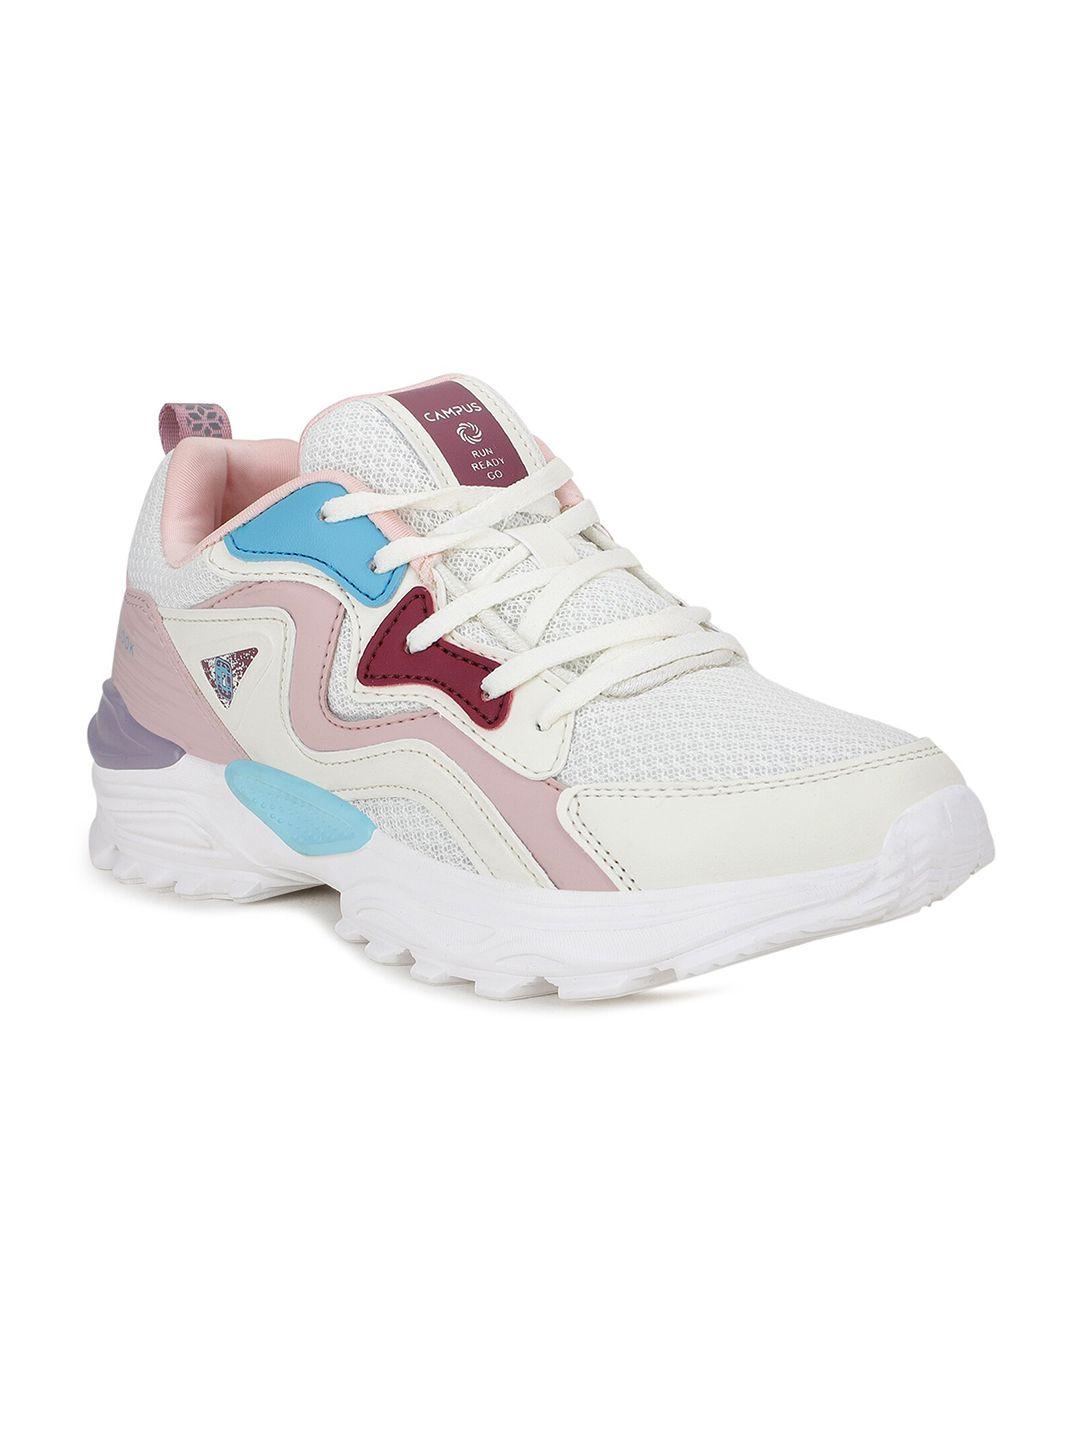 campus-women-off-white-mesh-running-shoes